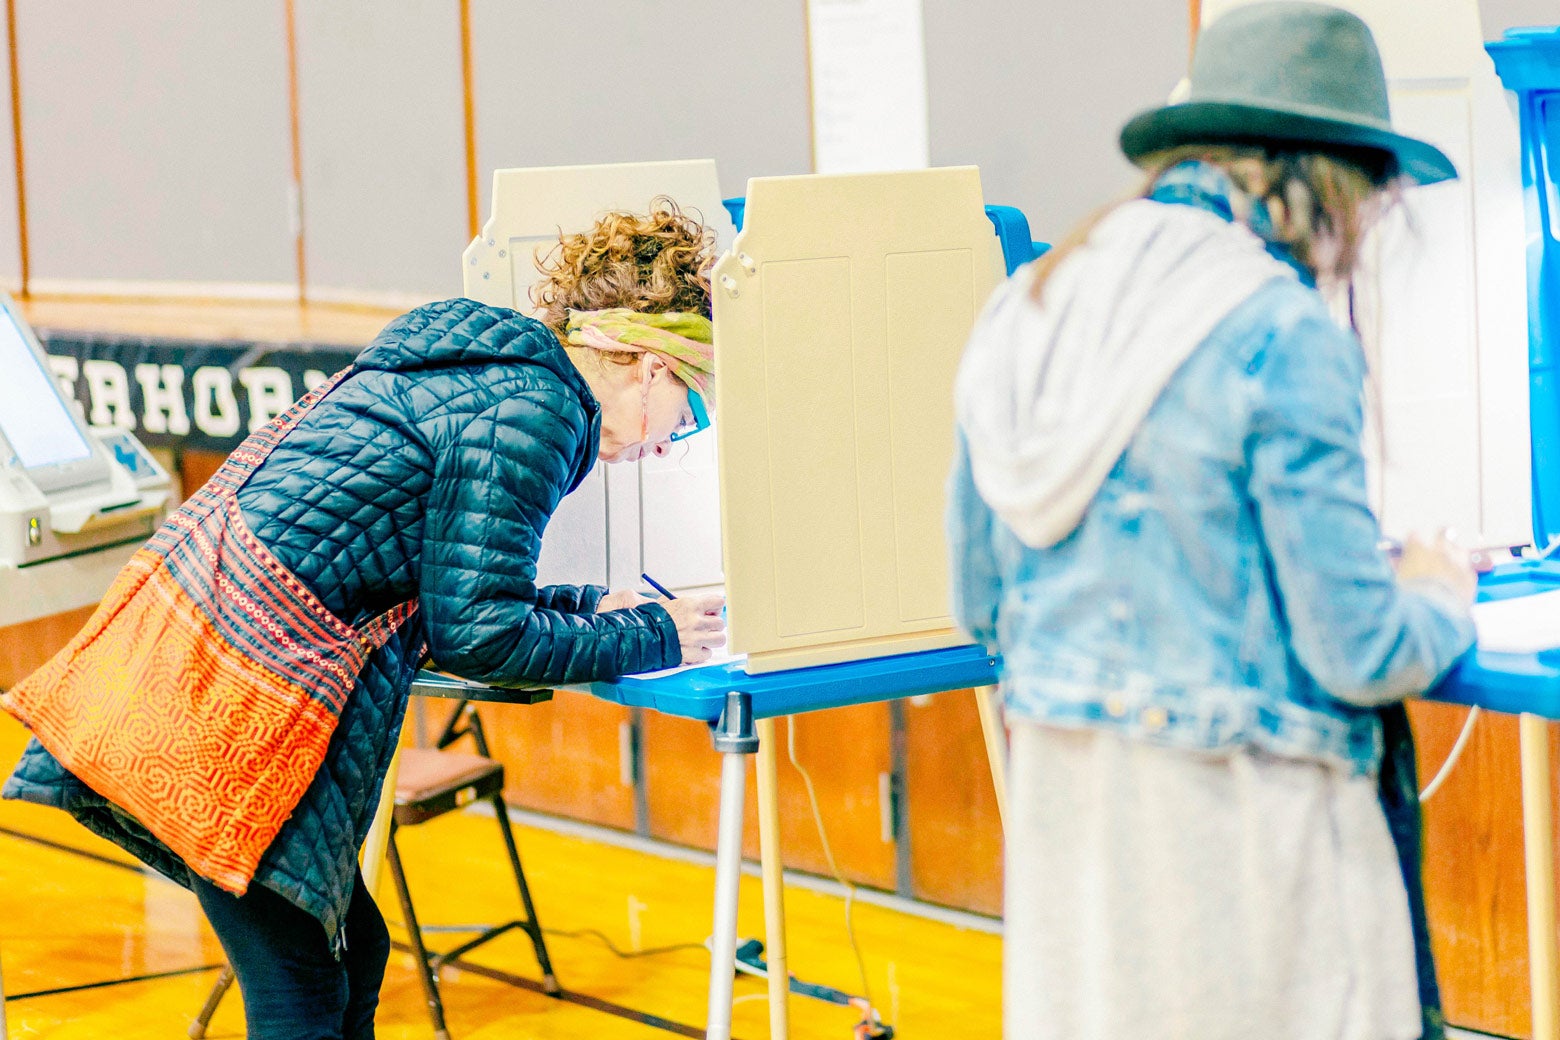 Voters cast ballots at a polling station in Minneapolis on Tuesday.